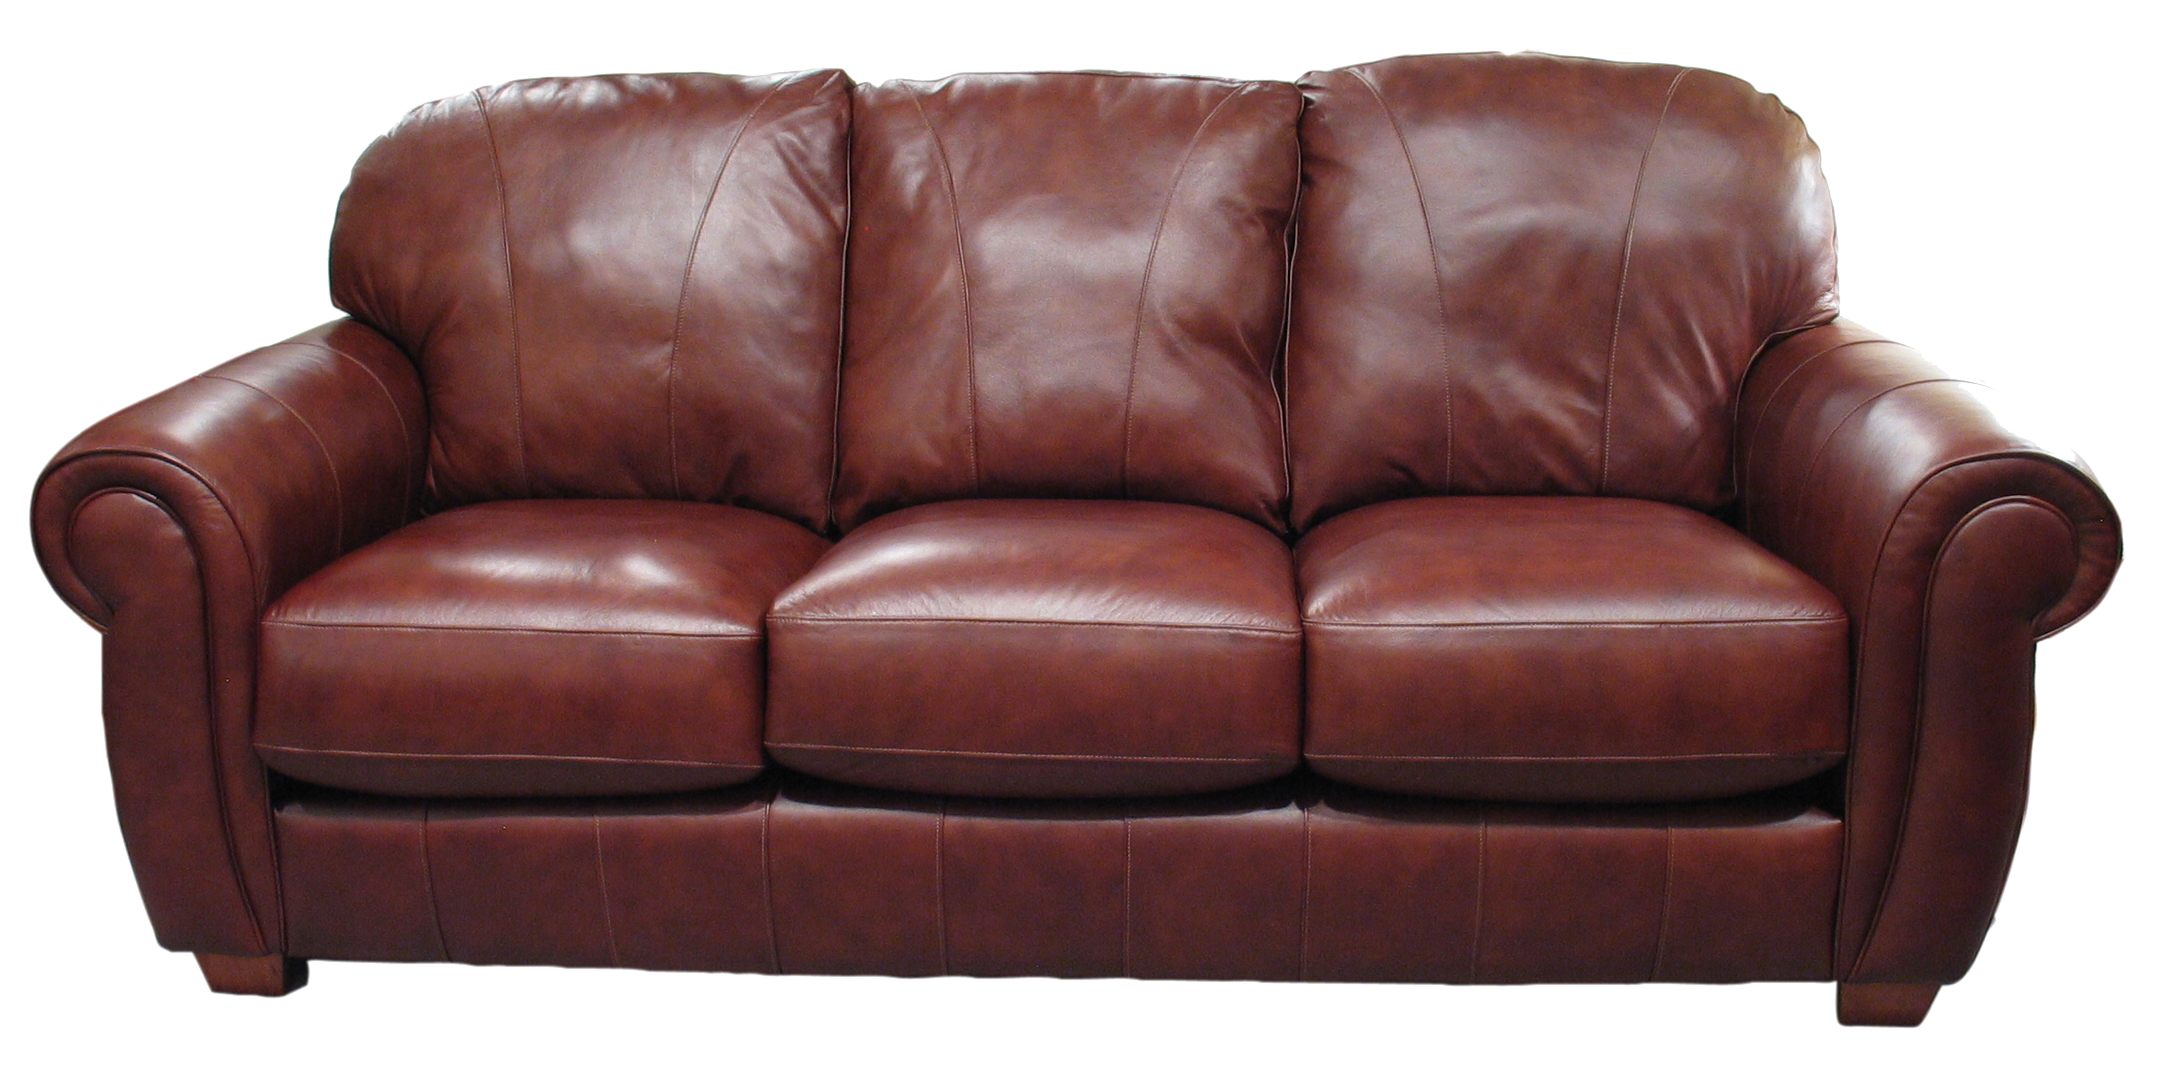 Cozy Couch Transparent Background